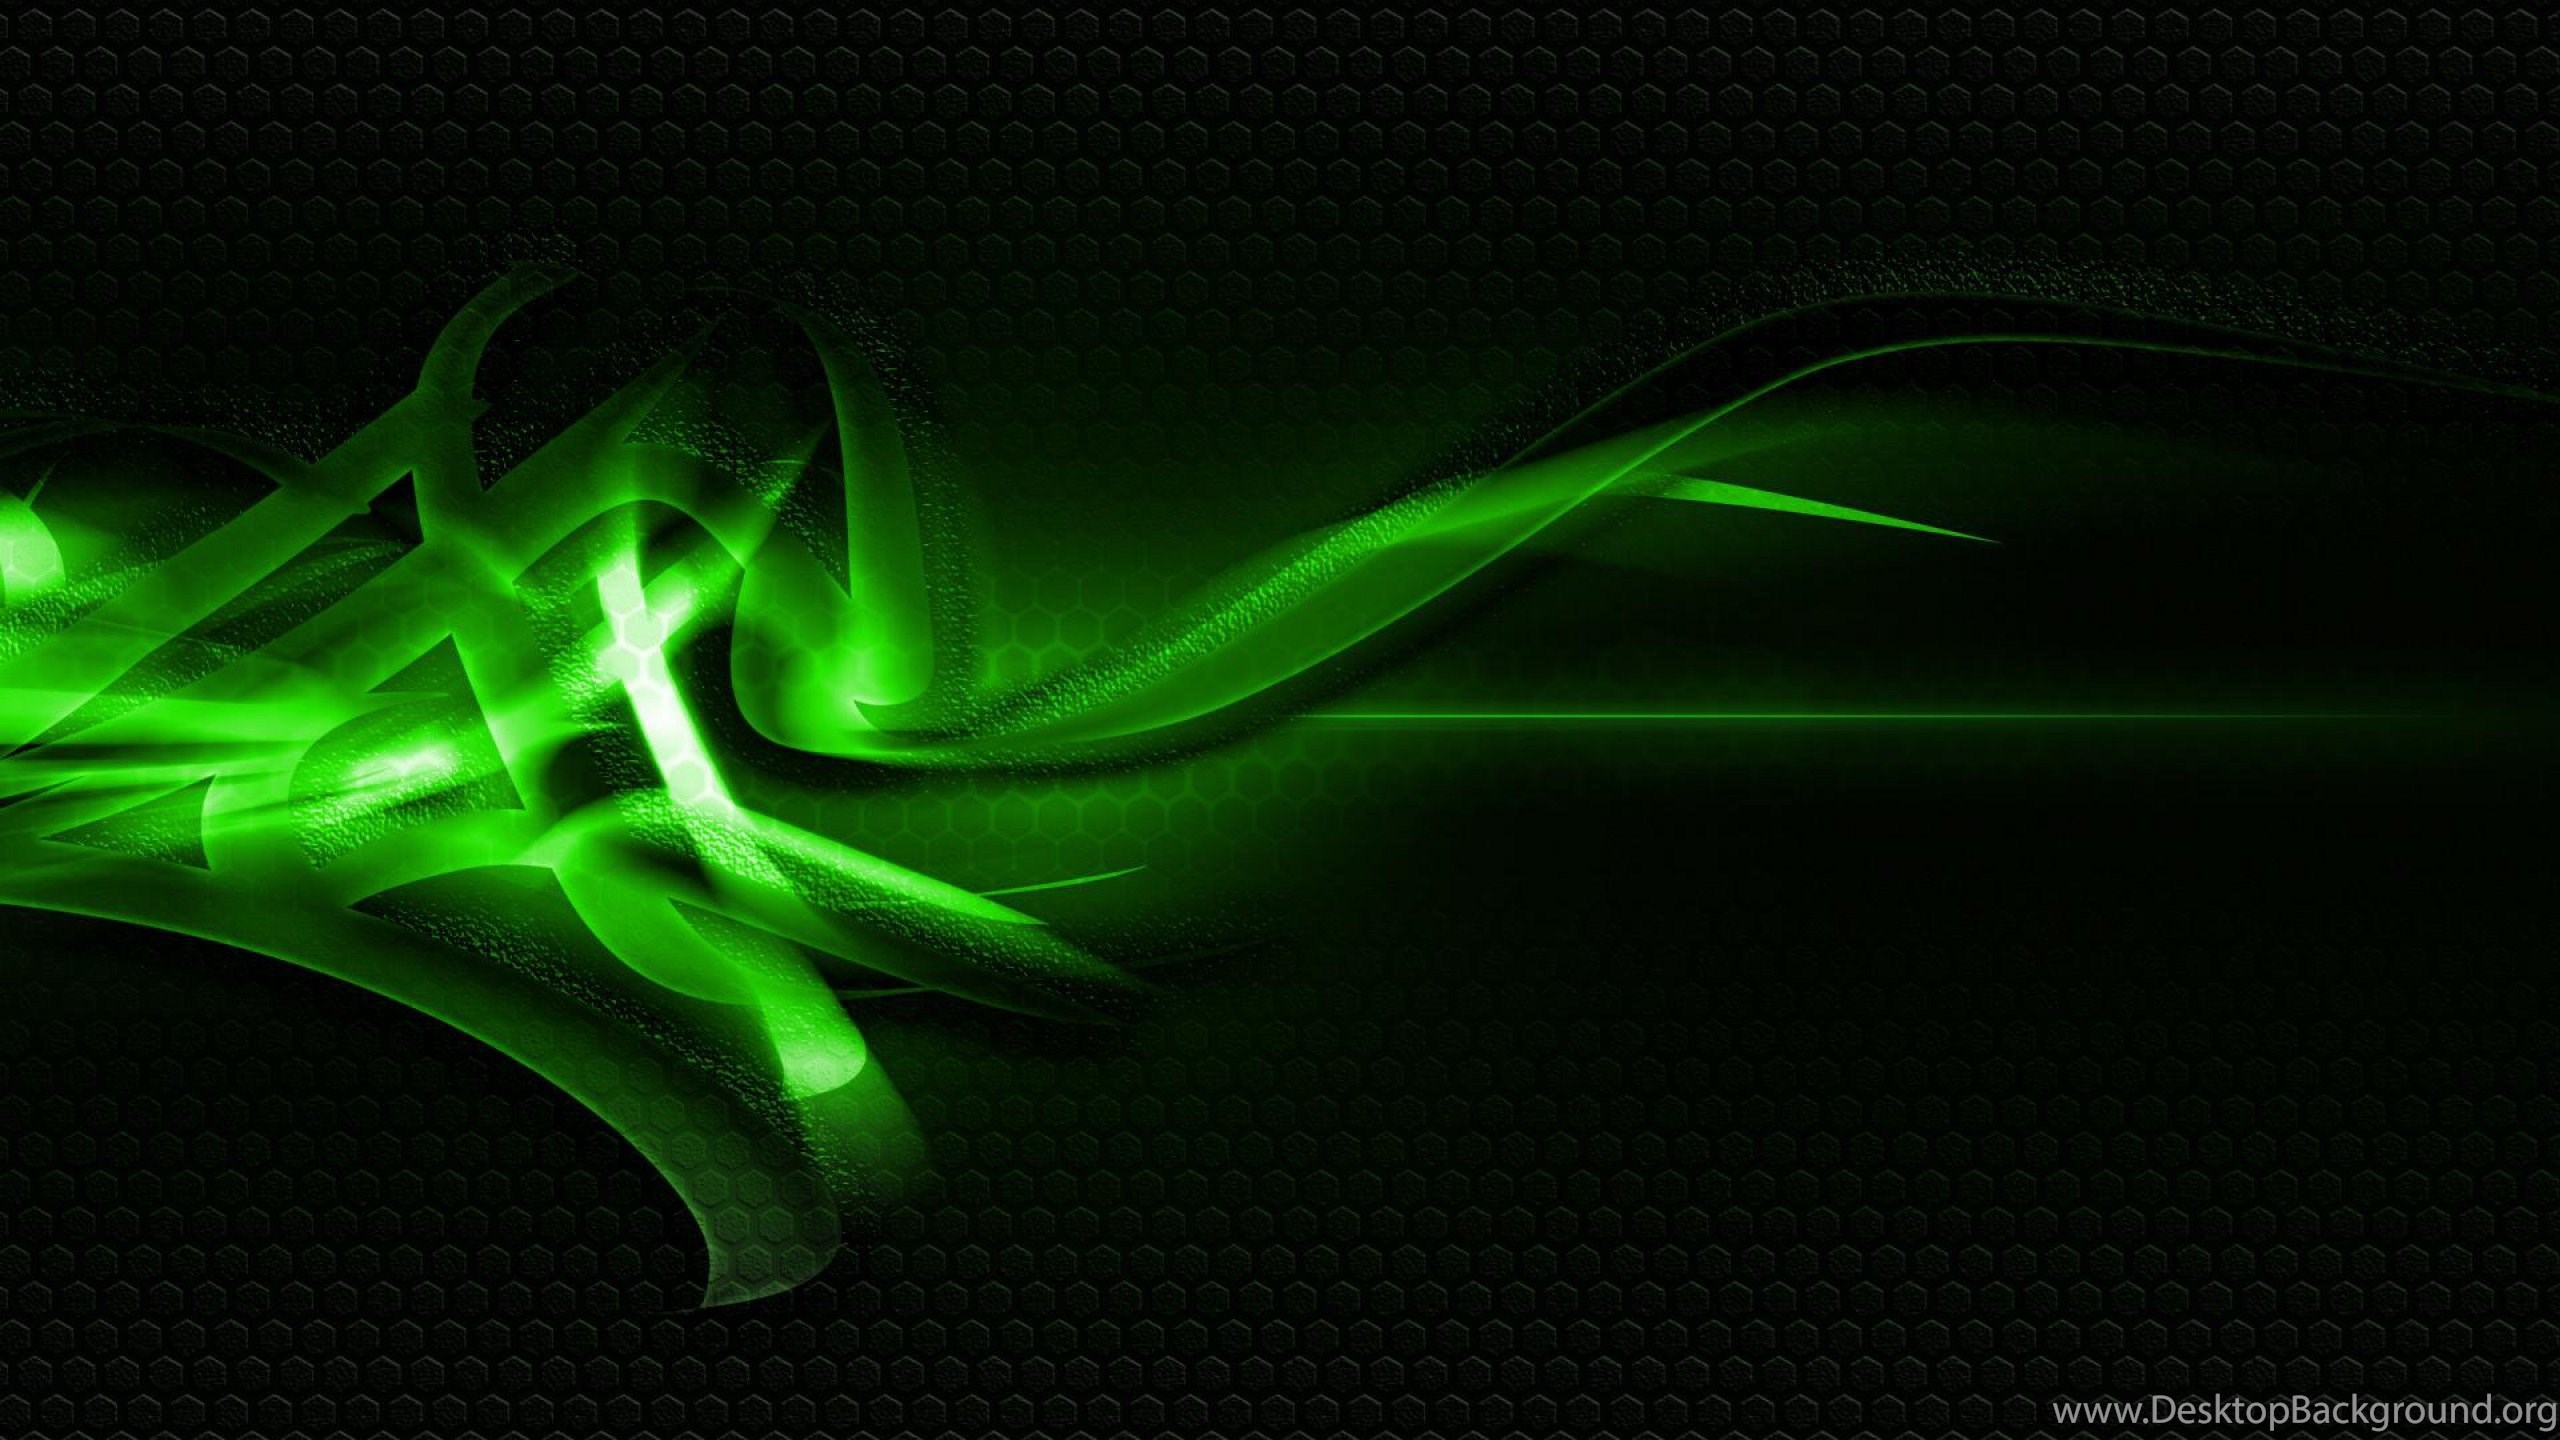 Black And Green Abstract Desktop Background HD 1482 HD. Desktop Background